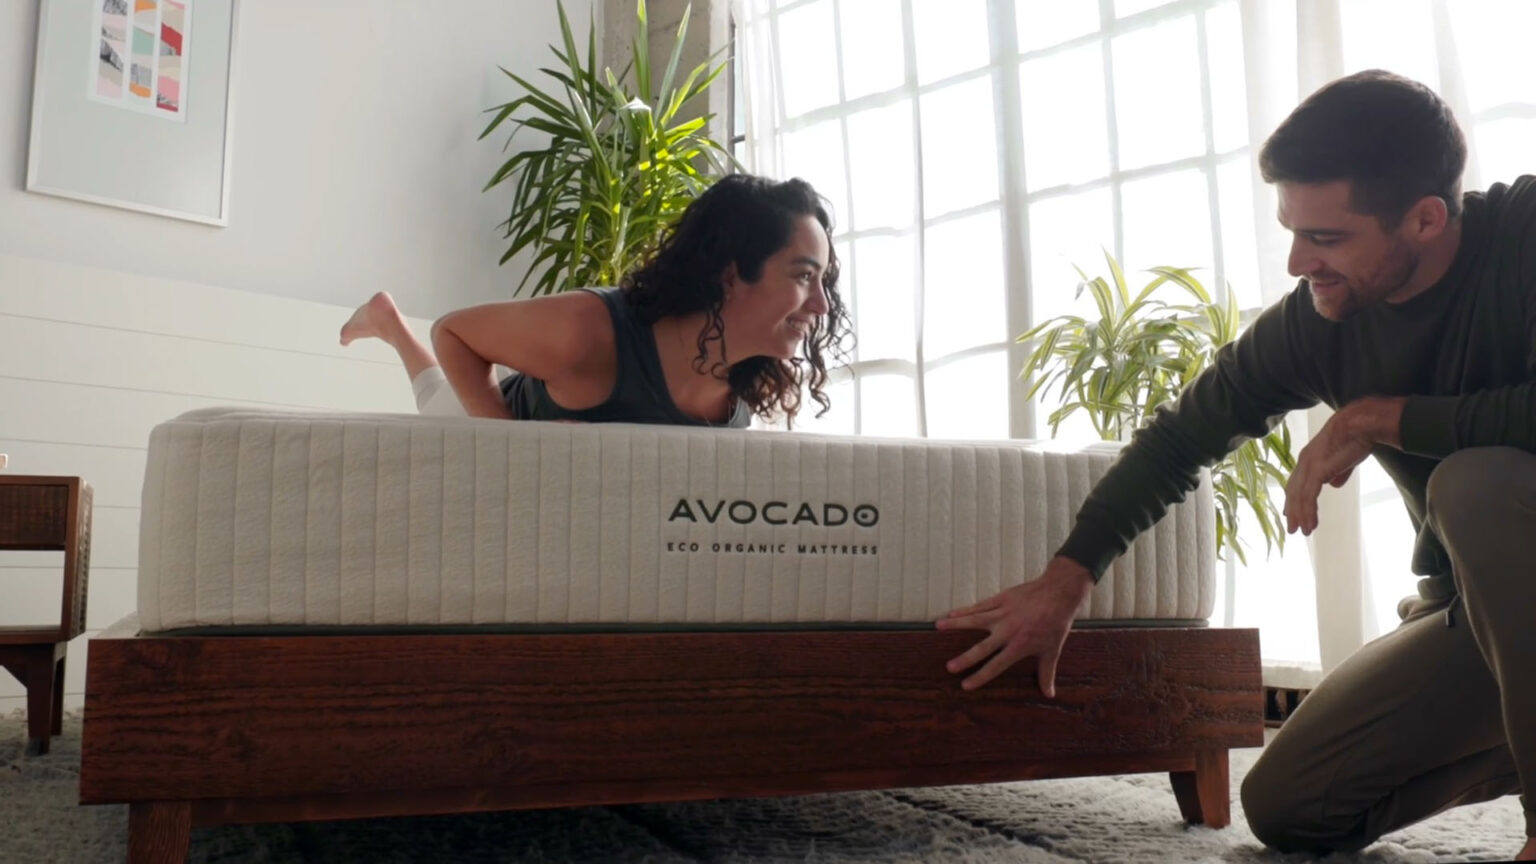 where to buy Avocado Mattress in Los Angeles